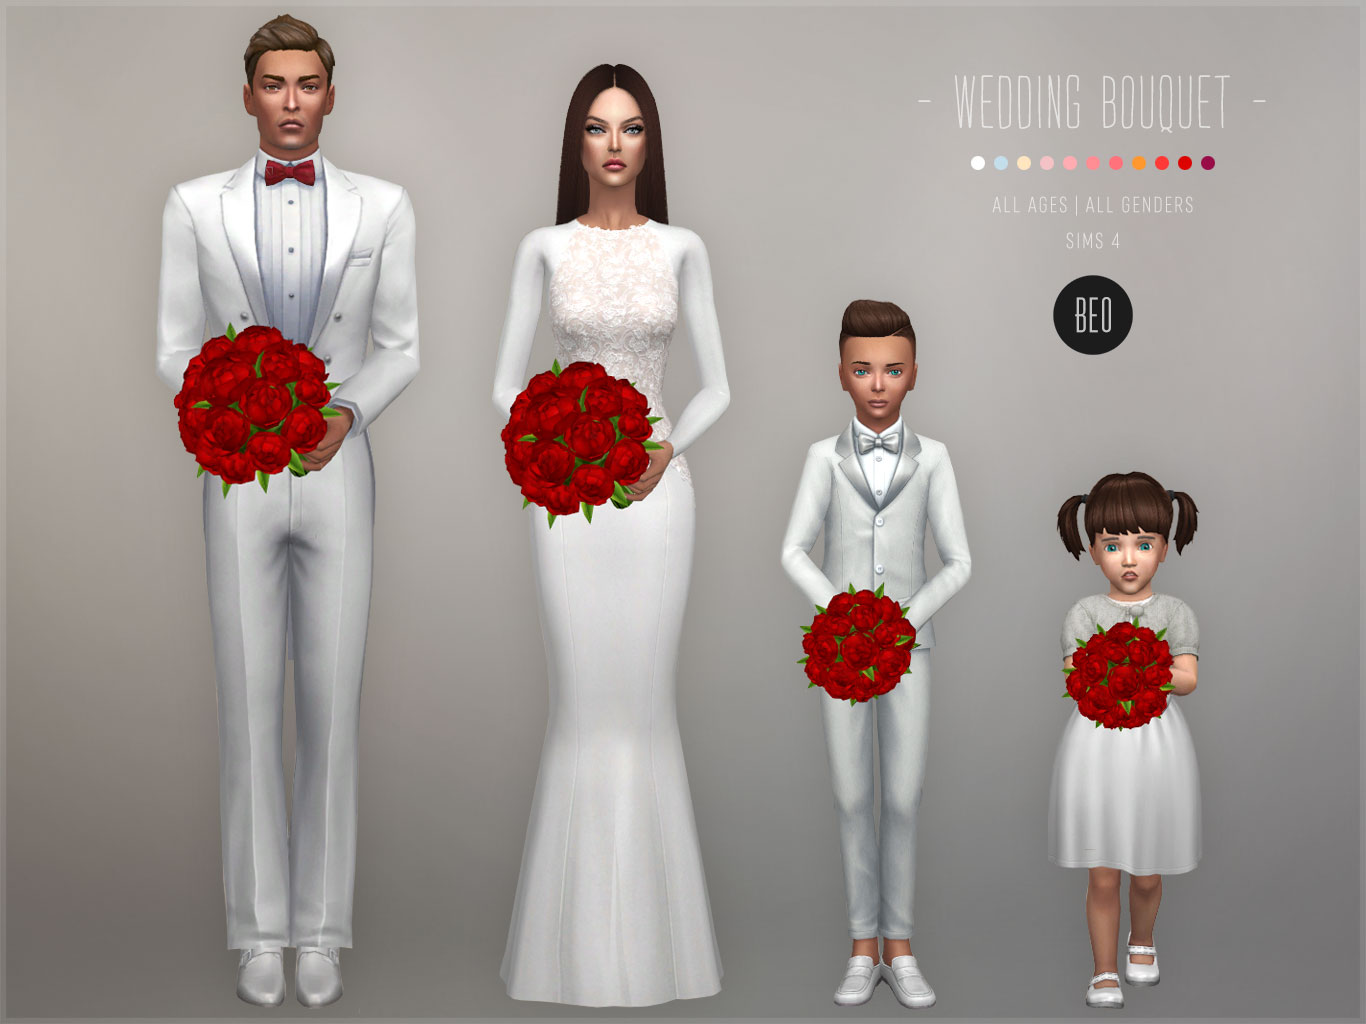 Wedding bouquet (update) for The Sims 4 by BEO